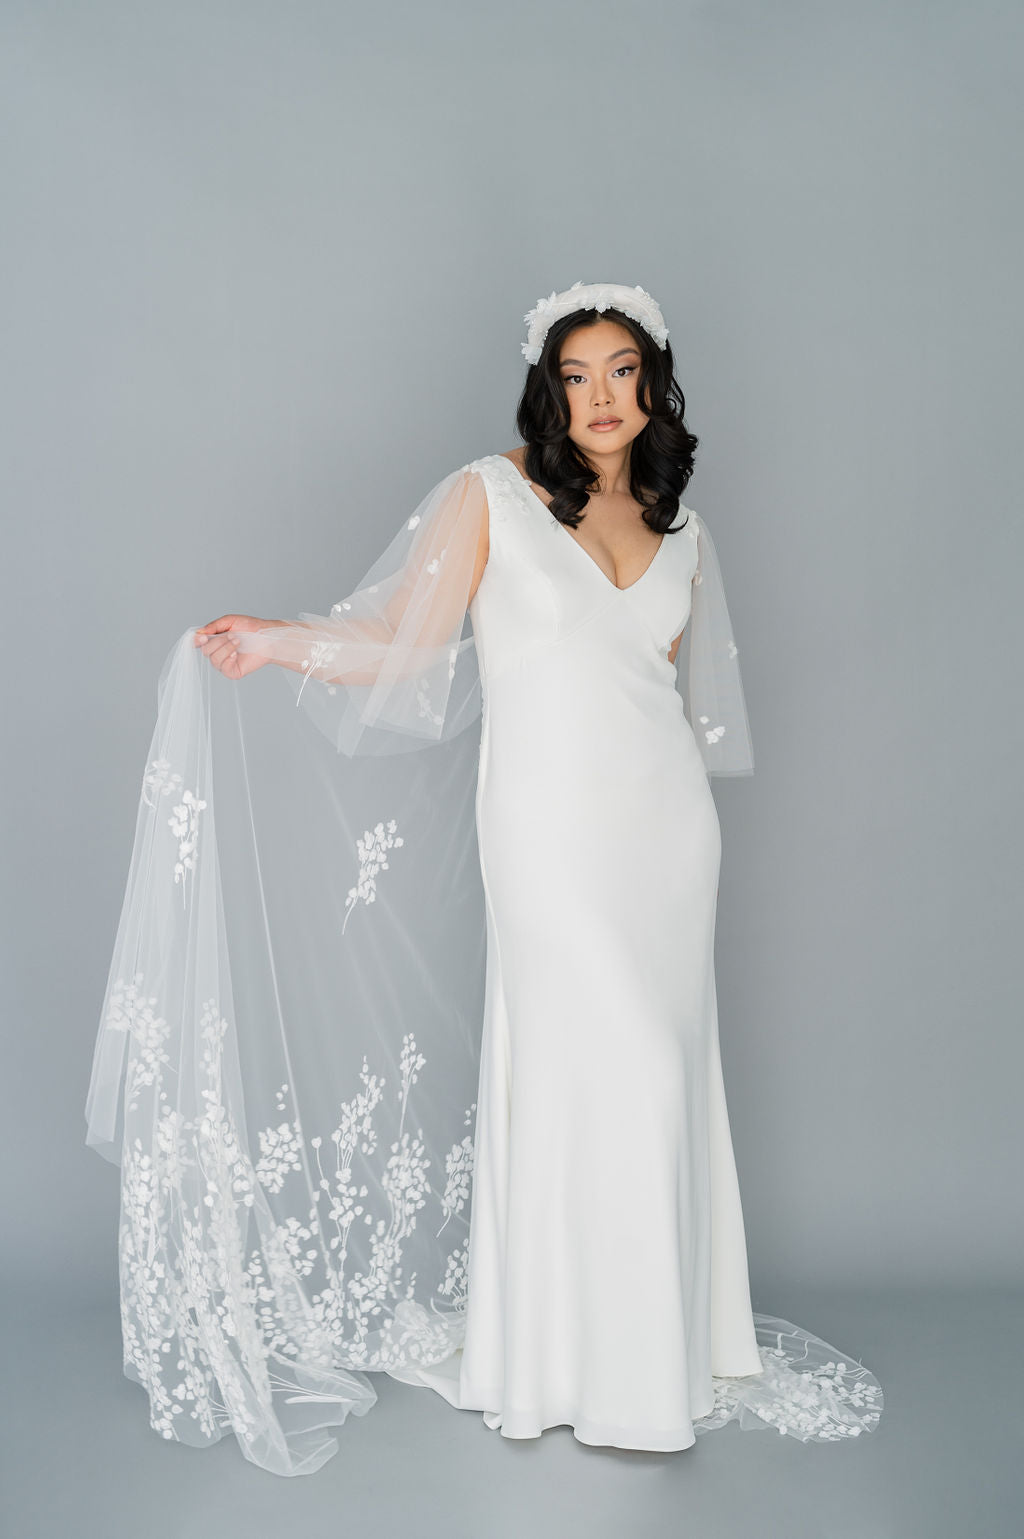 Romantic yet classic crepe and tulle wedding dress. Whimsical 3D applique with tulle flutter sleeves and train. Empire line and V neckline. Custom made in Toronto by Catherine Langlois.